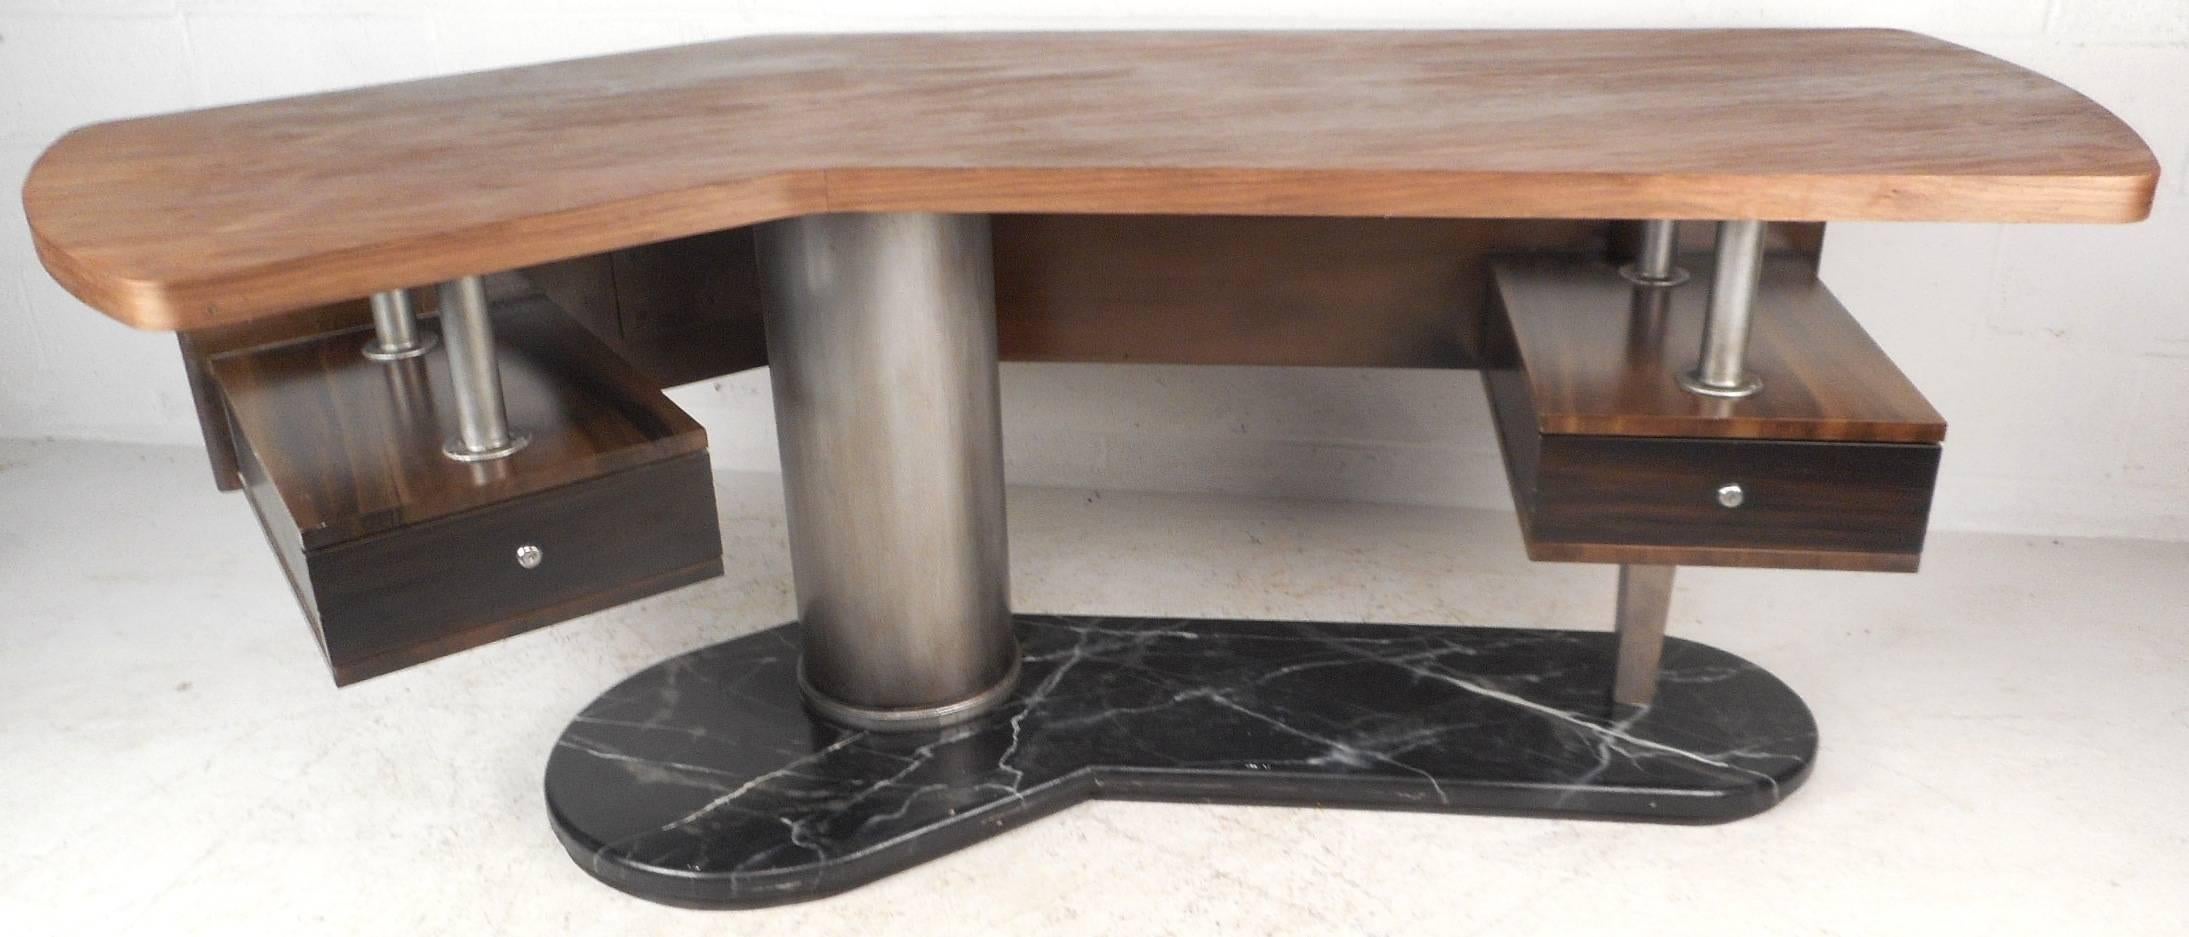 This beautiful contemporary modern desk features a heavy black base with a sculpted floating tabletop. Unique desk shape ensures convienent accessibility and plenty of work space. A massive cylindrical support provides optimal sturdiness without